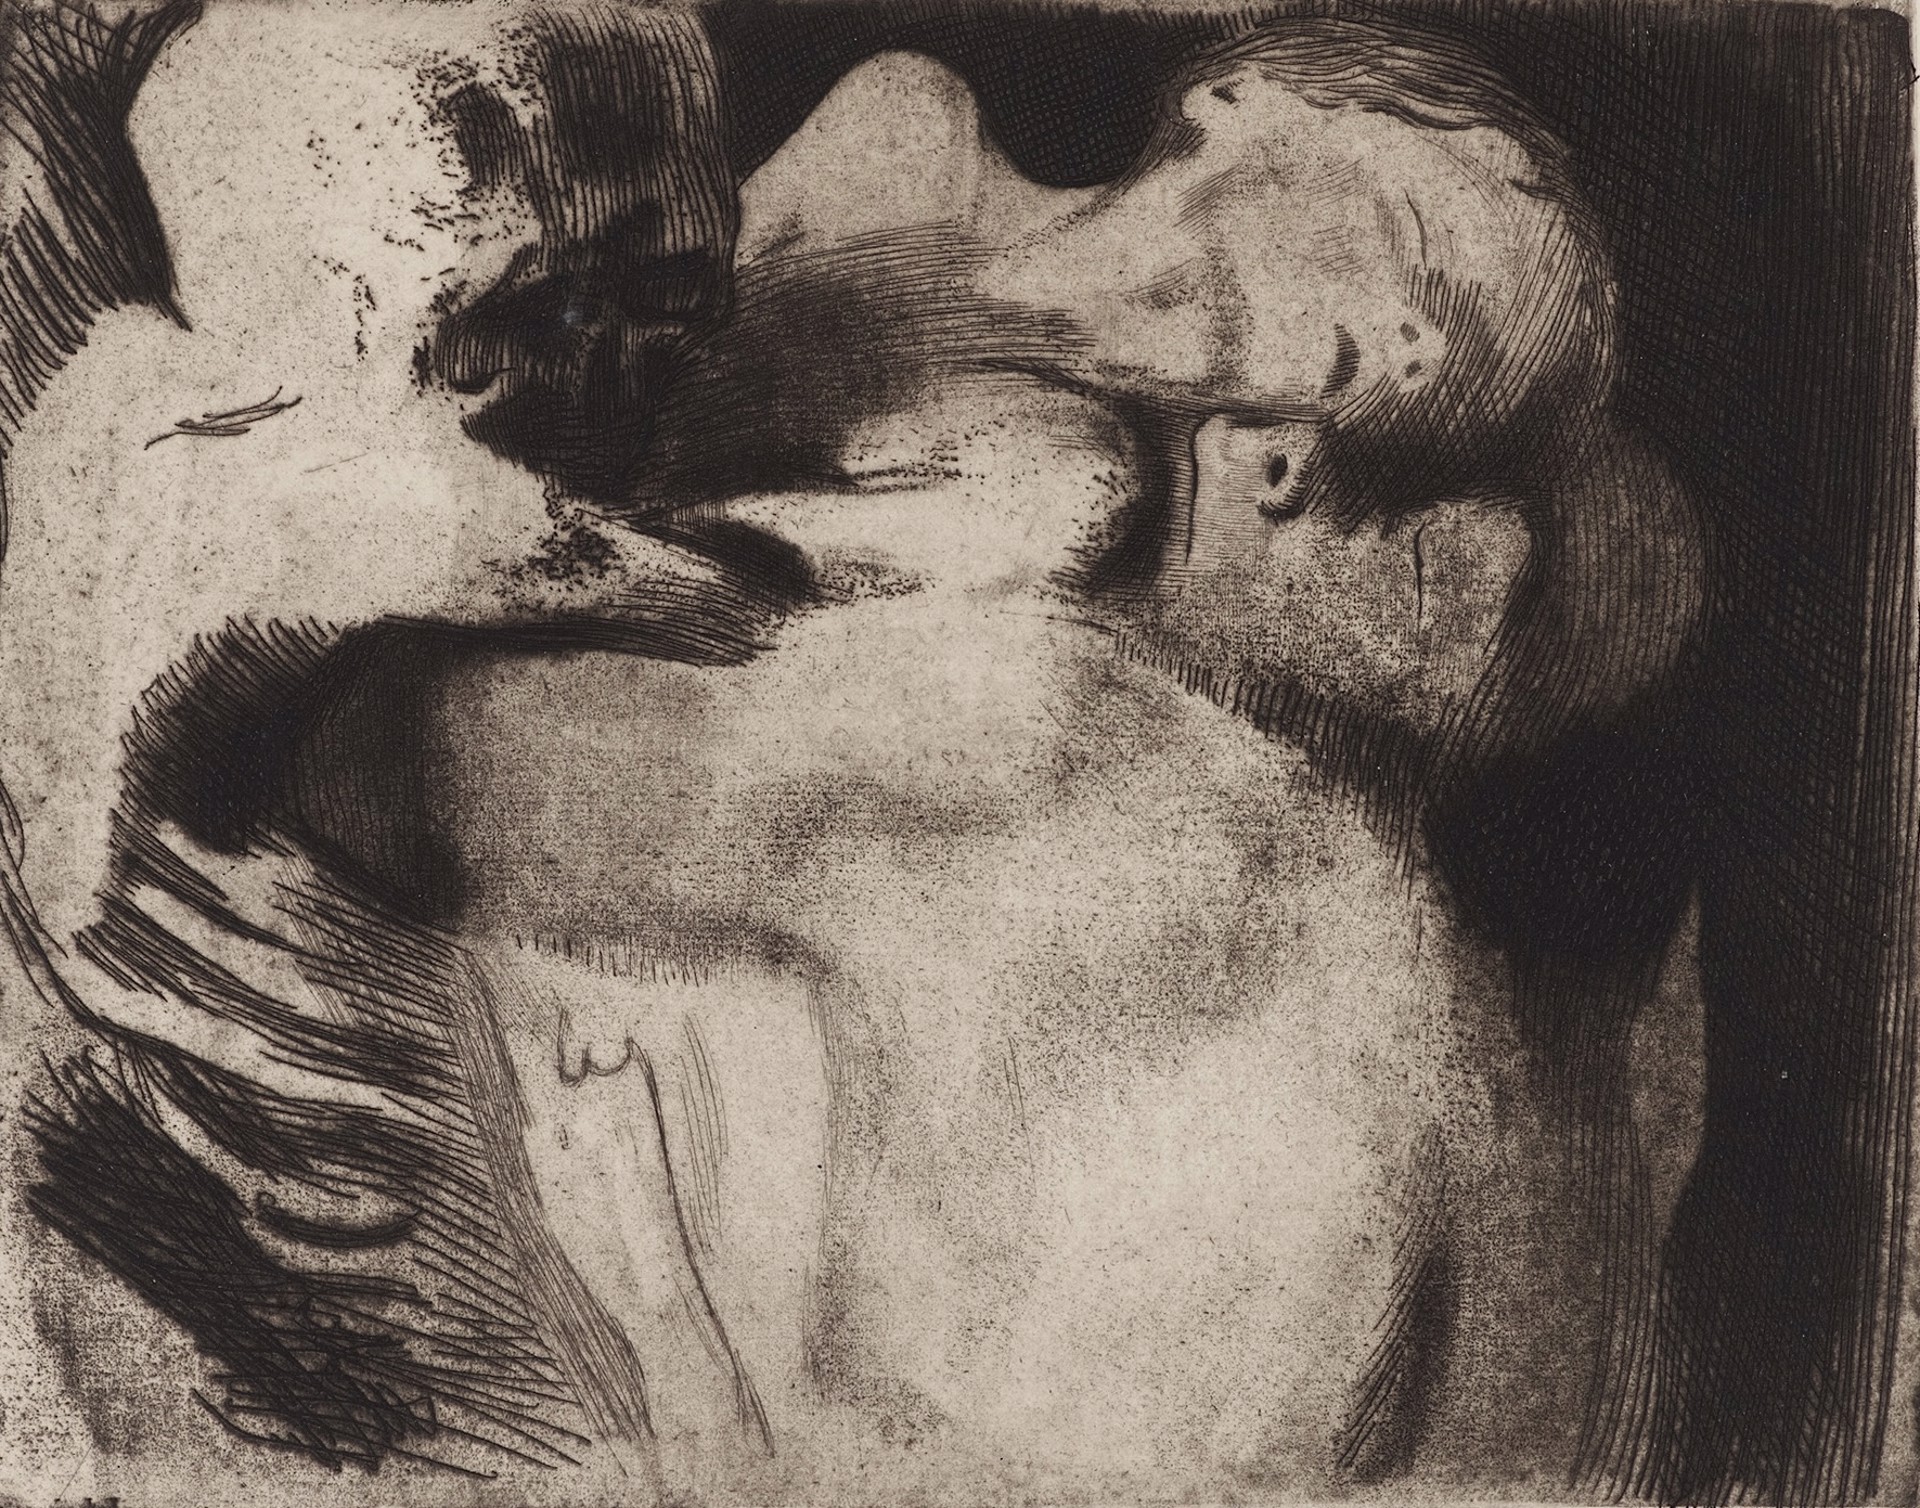 Death and Mother Struggling Over Child by Kathe Kollwitz